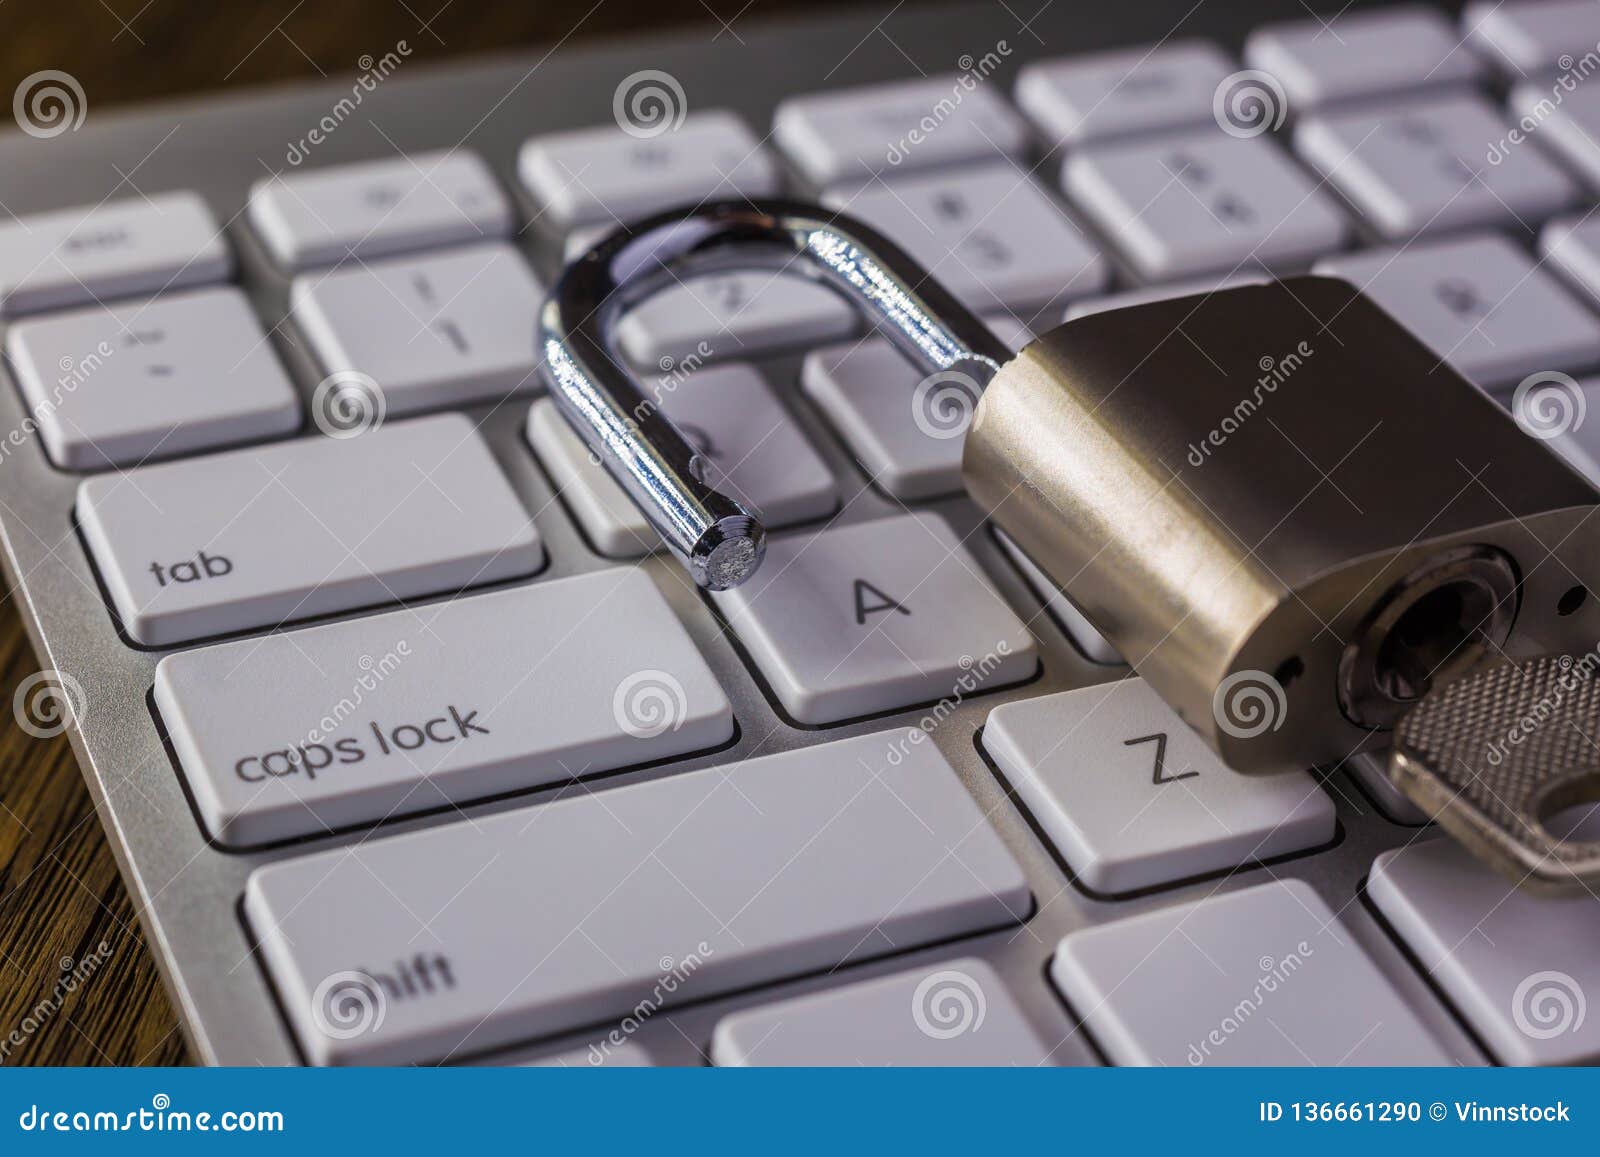 Unlock Key And Caps Lock Button On Keyboard Stock Photo Image Of